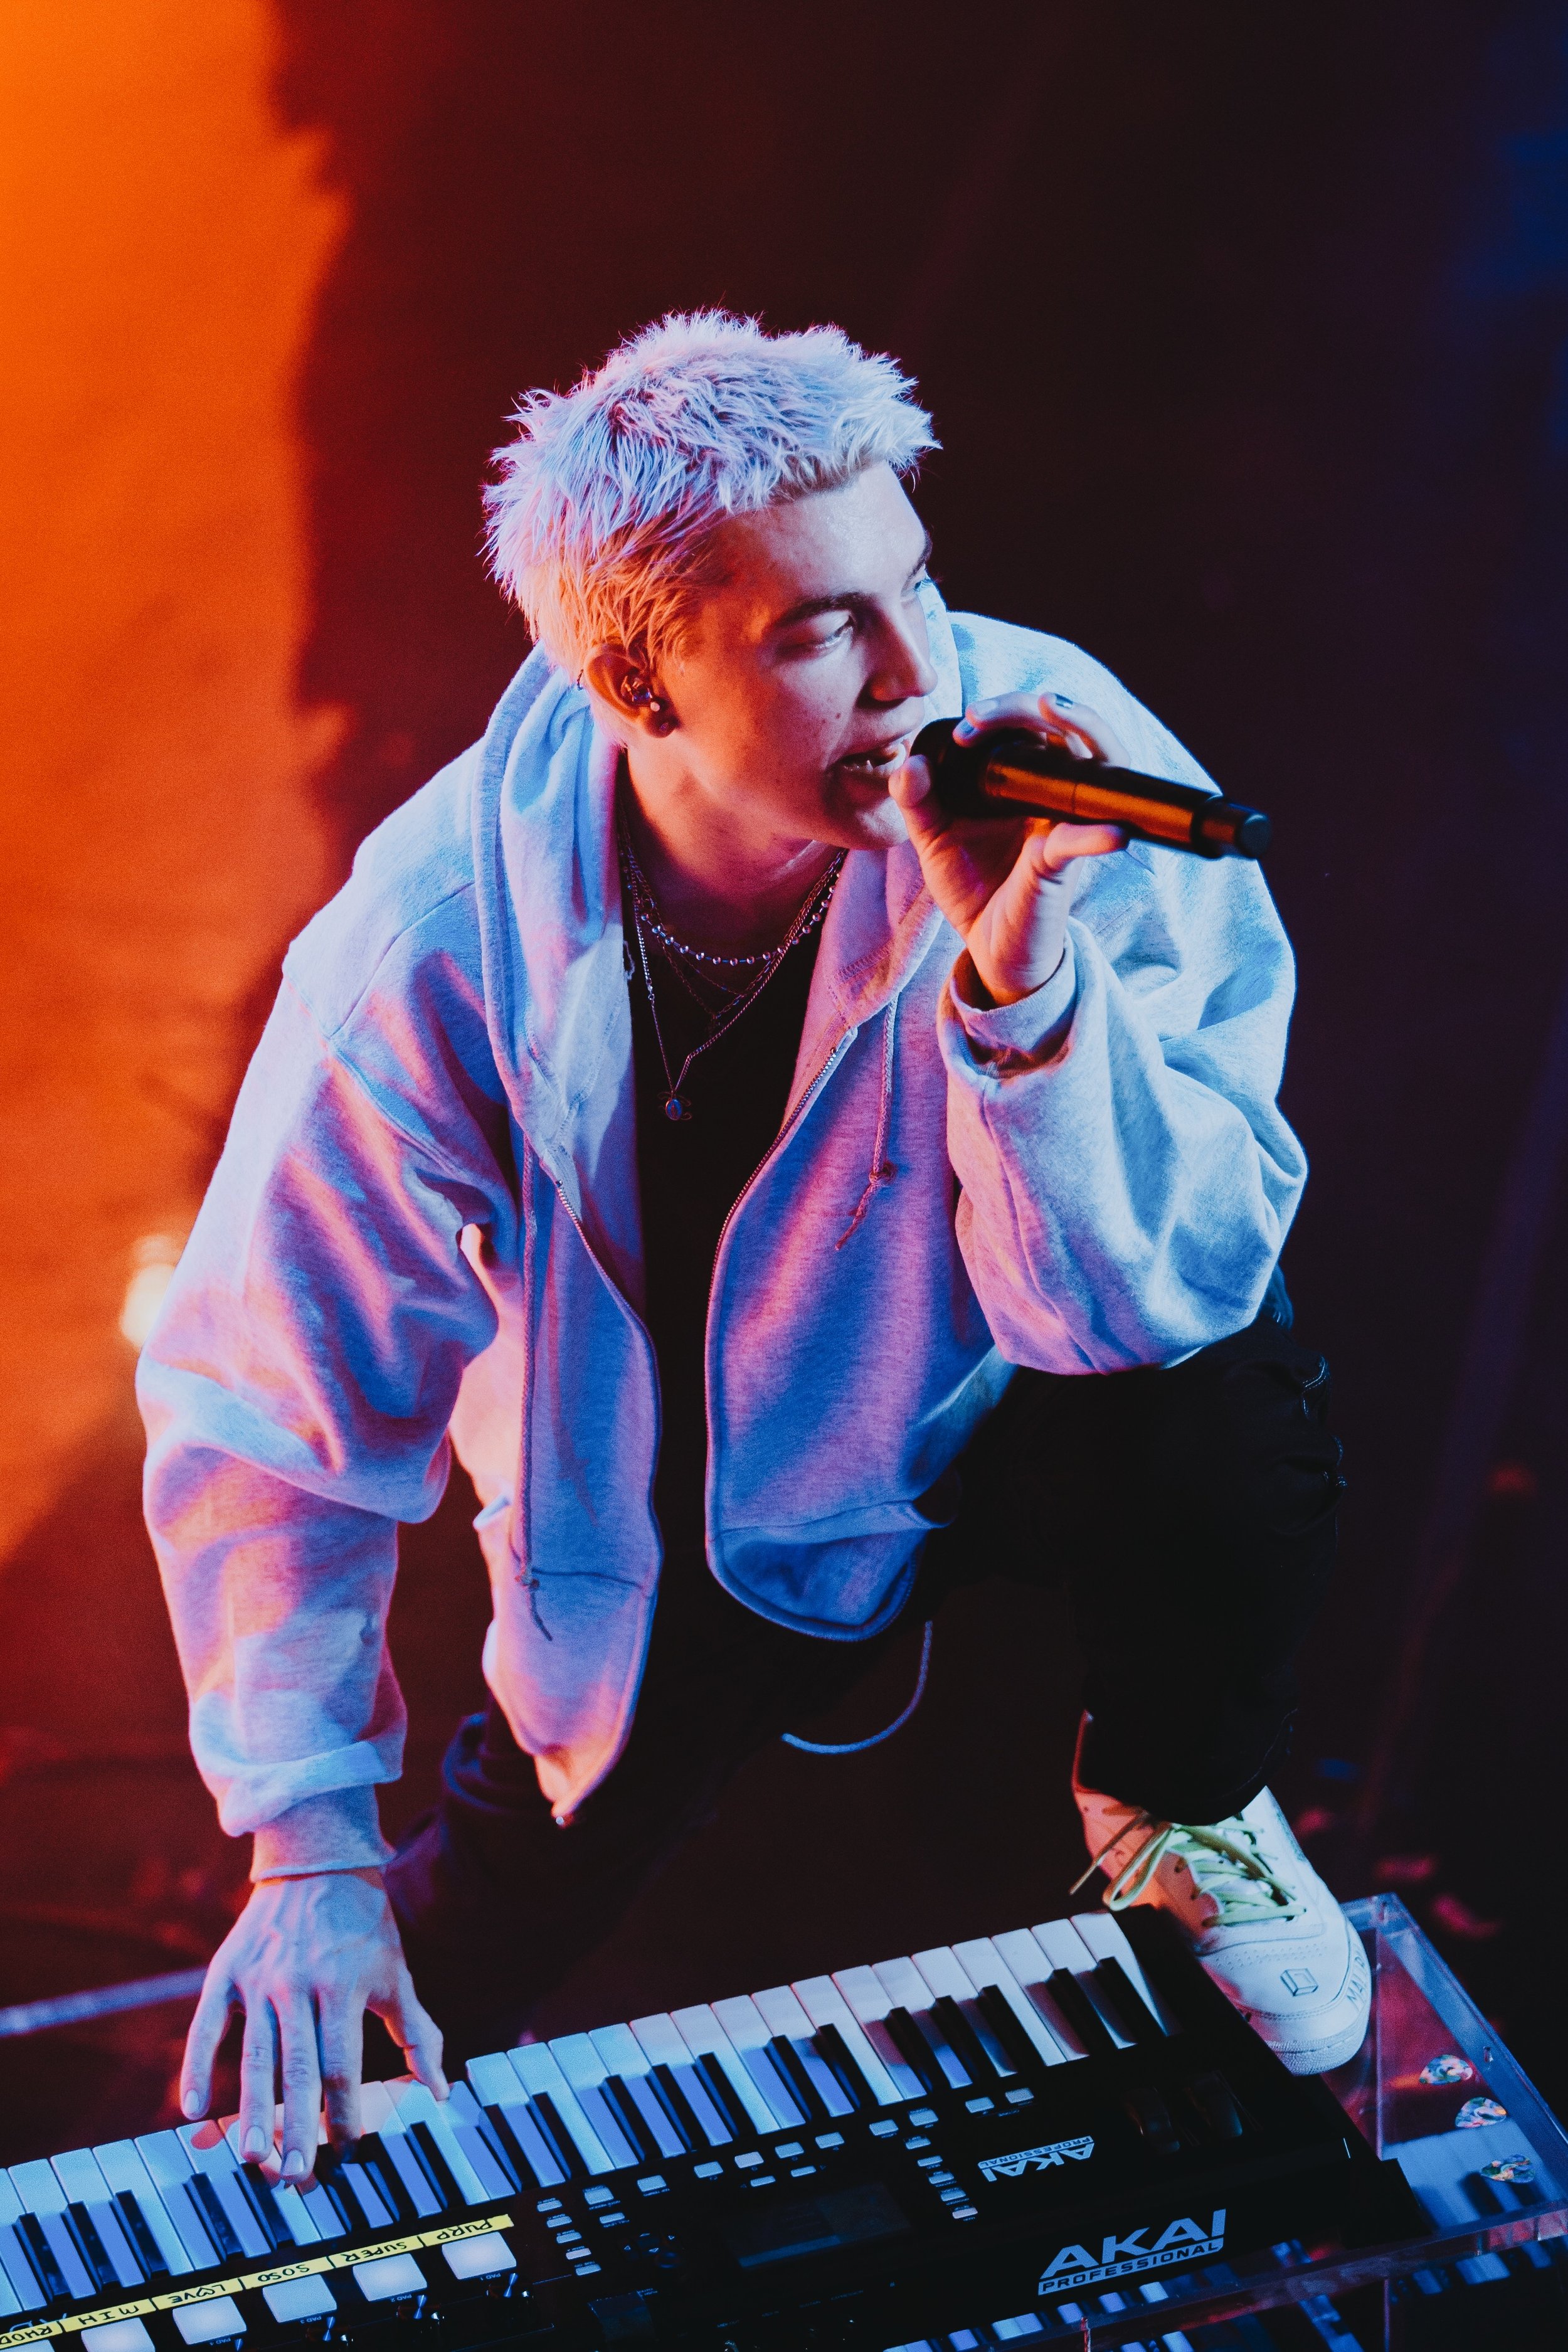 Paul Jason Klein, a white male musician in his 20s, performs onstage wearing black pants, a grey sweatshirt drenched in sunset-like light, a series of silver necklaces, and white shoes with green laces. Only one foot is visible in this image as Paul rests it on the clear plastic table next to his keyboard. His hair is bleach blonde and illuminated in colored light. One hand, wearing blue nail polish, is holding a microphone, while the other plays a chord on the keyboard. 